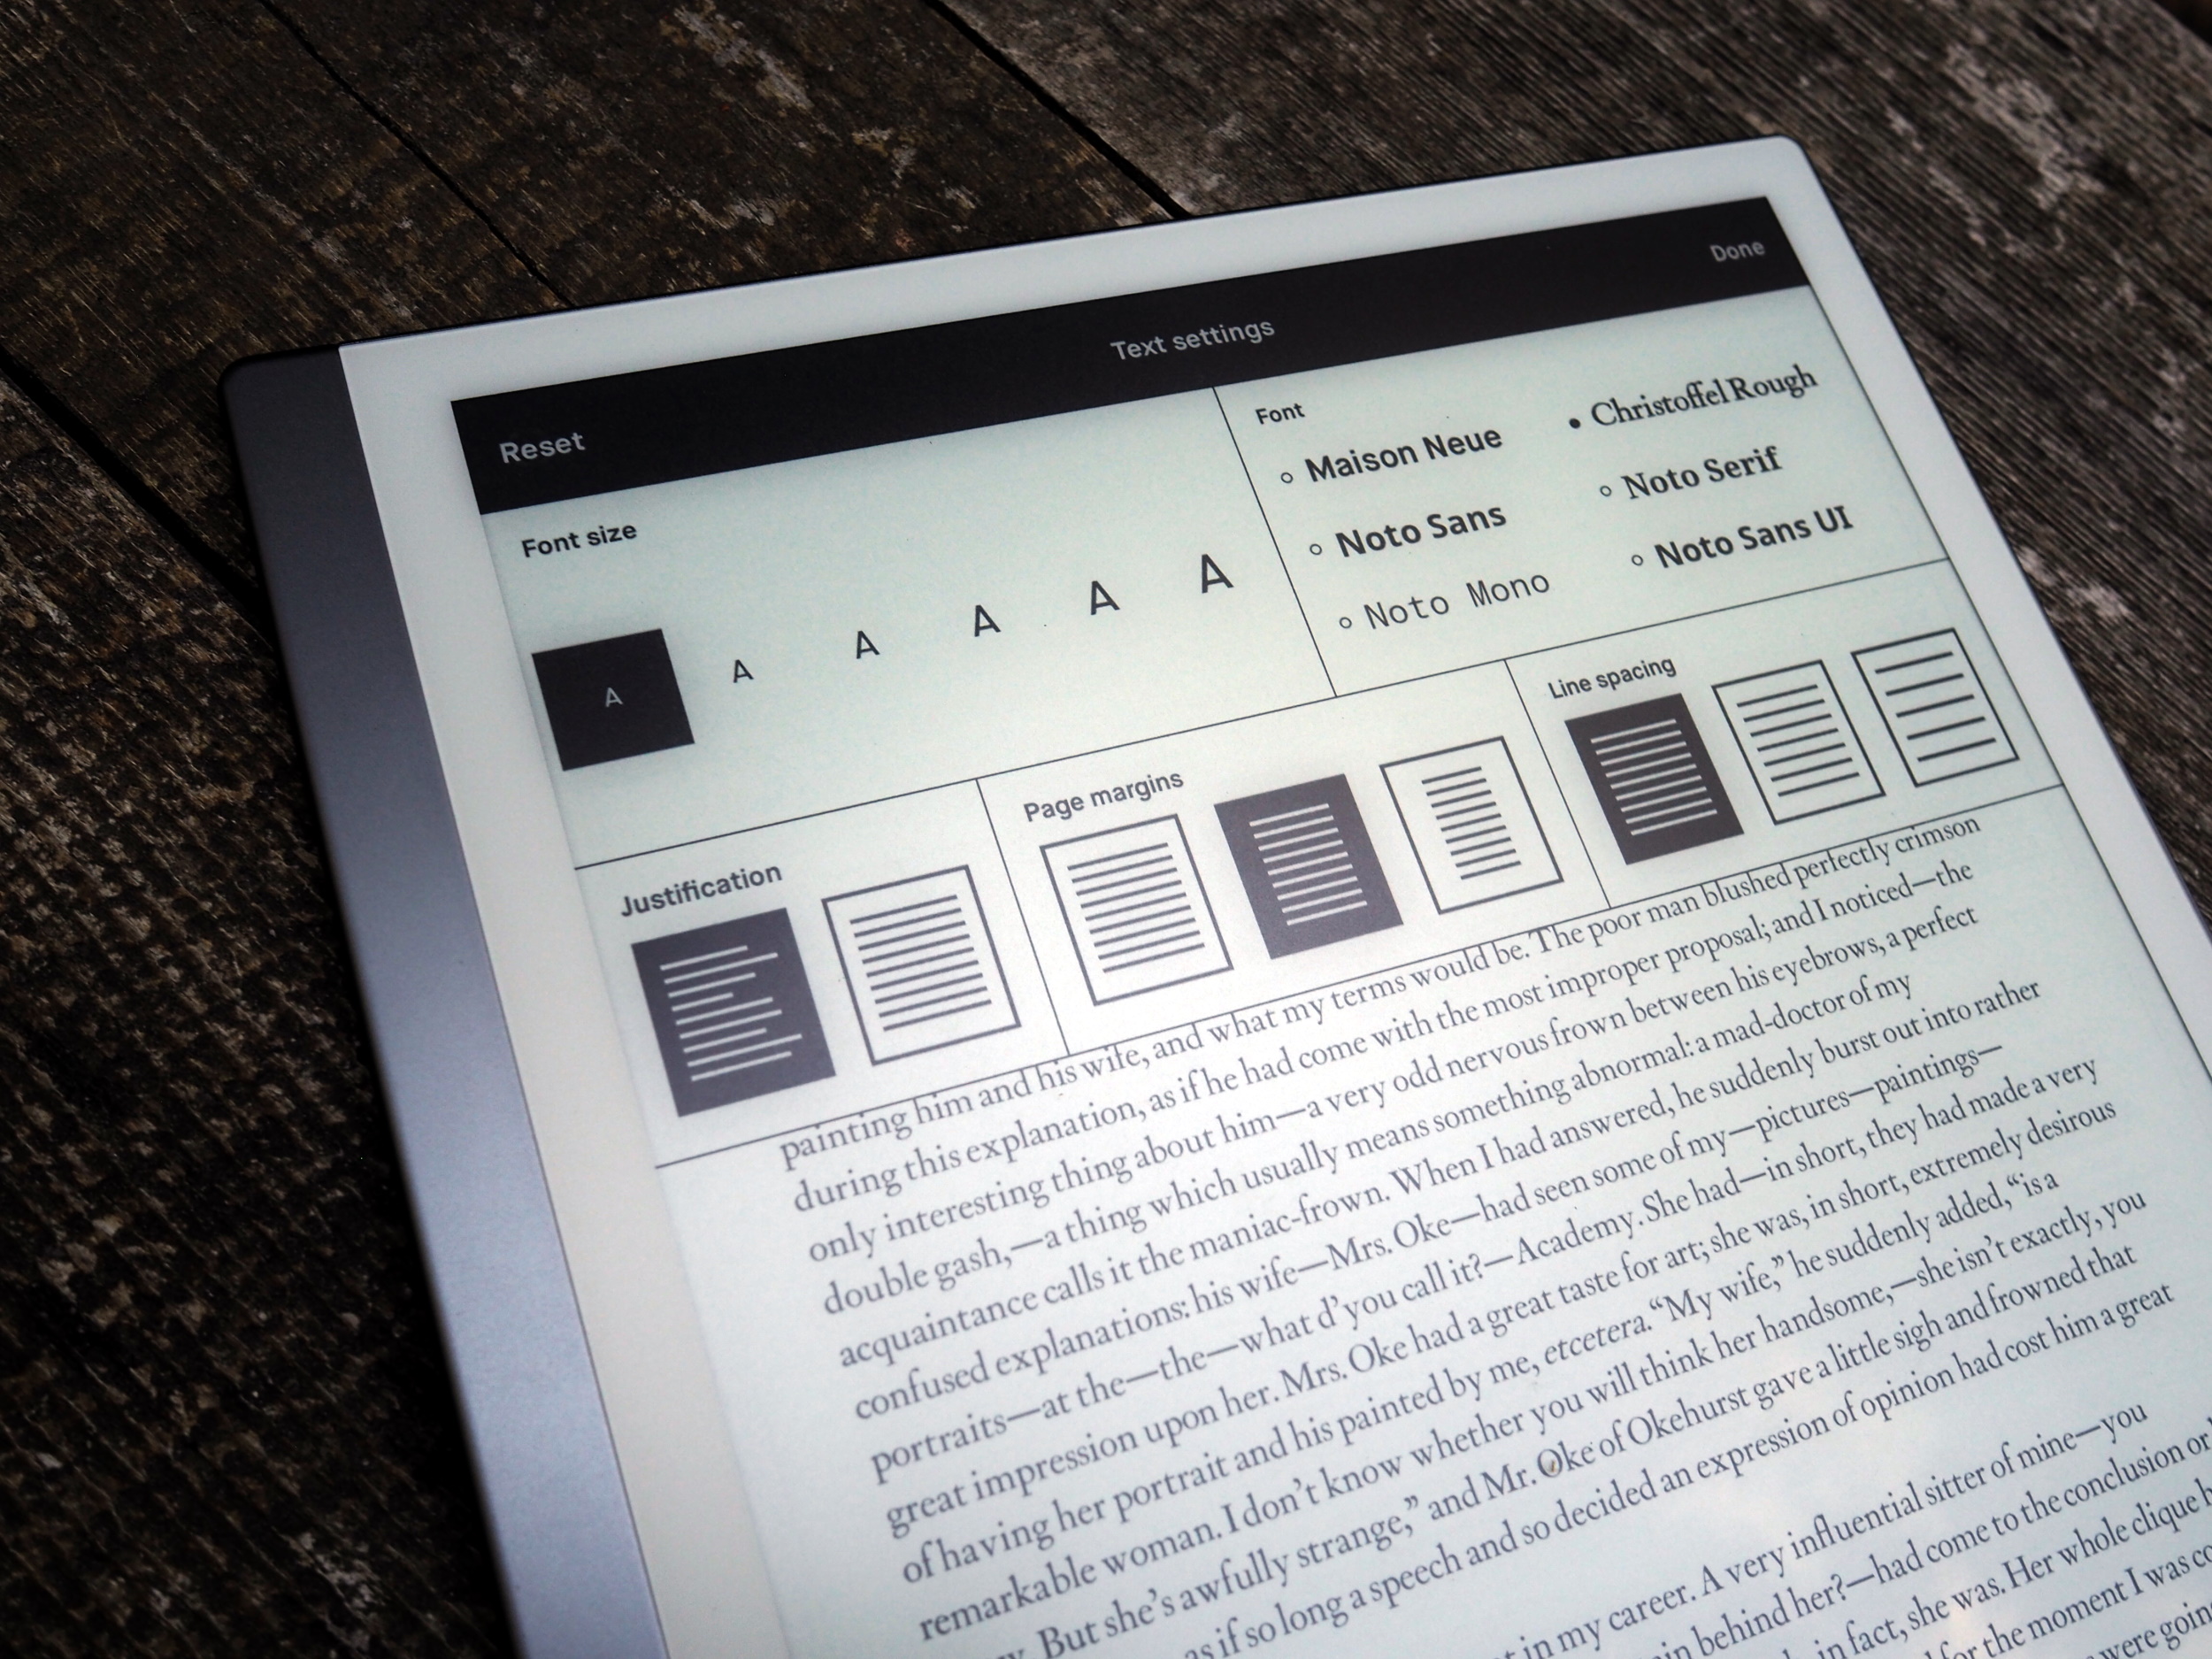 Text options on the remarkable tablet